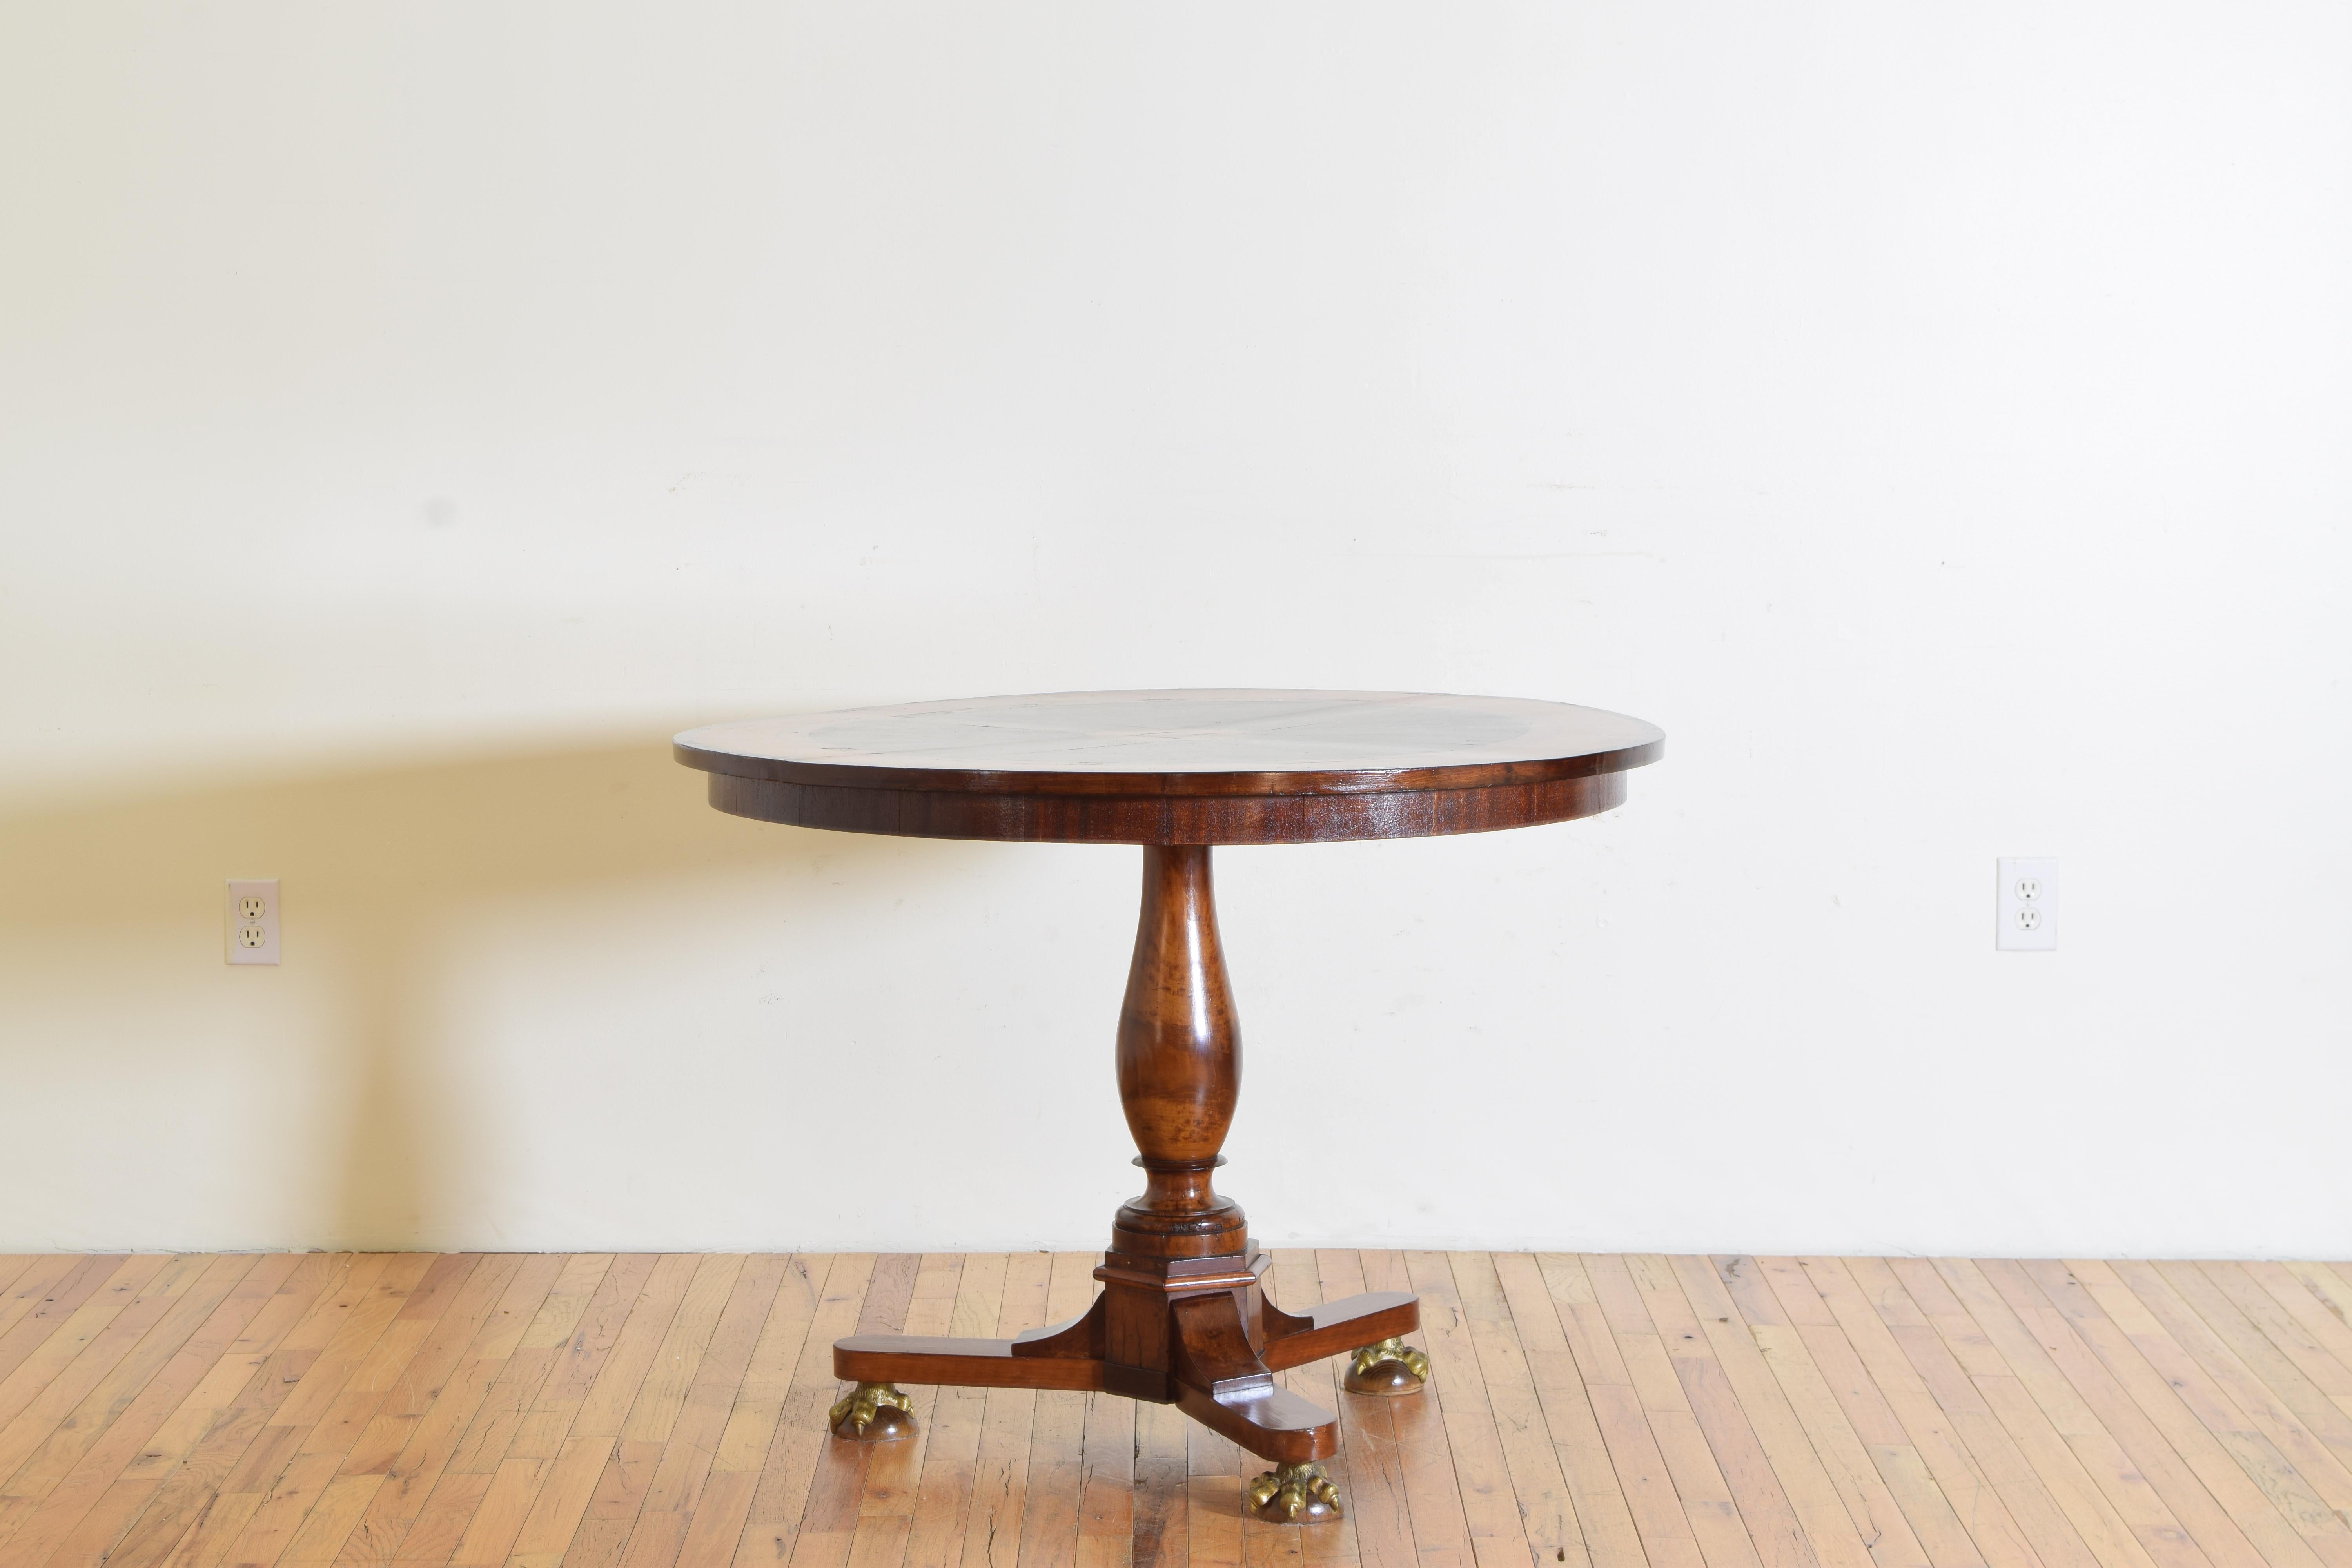 Having a round top covered in various veneers forming concentric rings from a centered sphere, the top reinforced with a hidden steel support, a solid wooden standard atop a shaped tripartite base raised on brass claw feet atop balls, either